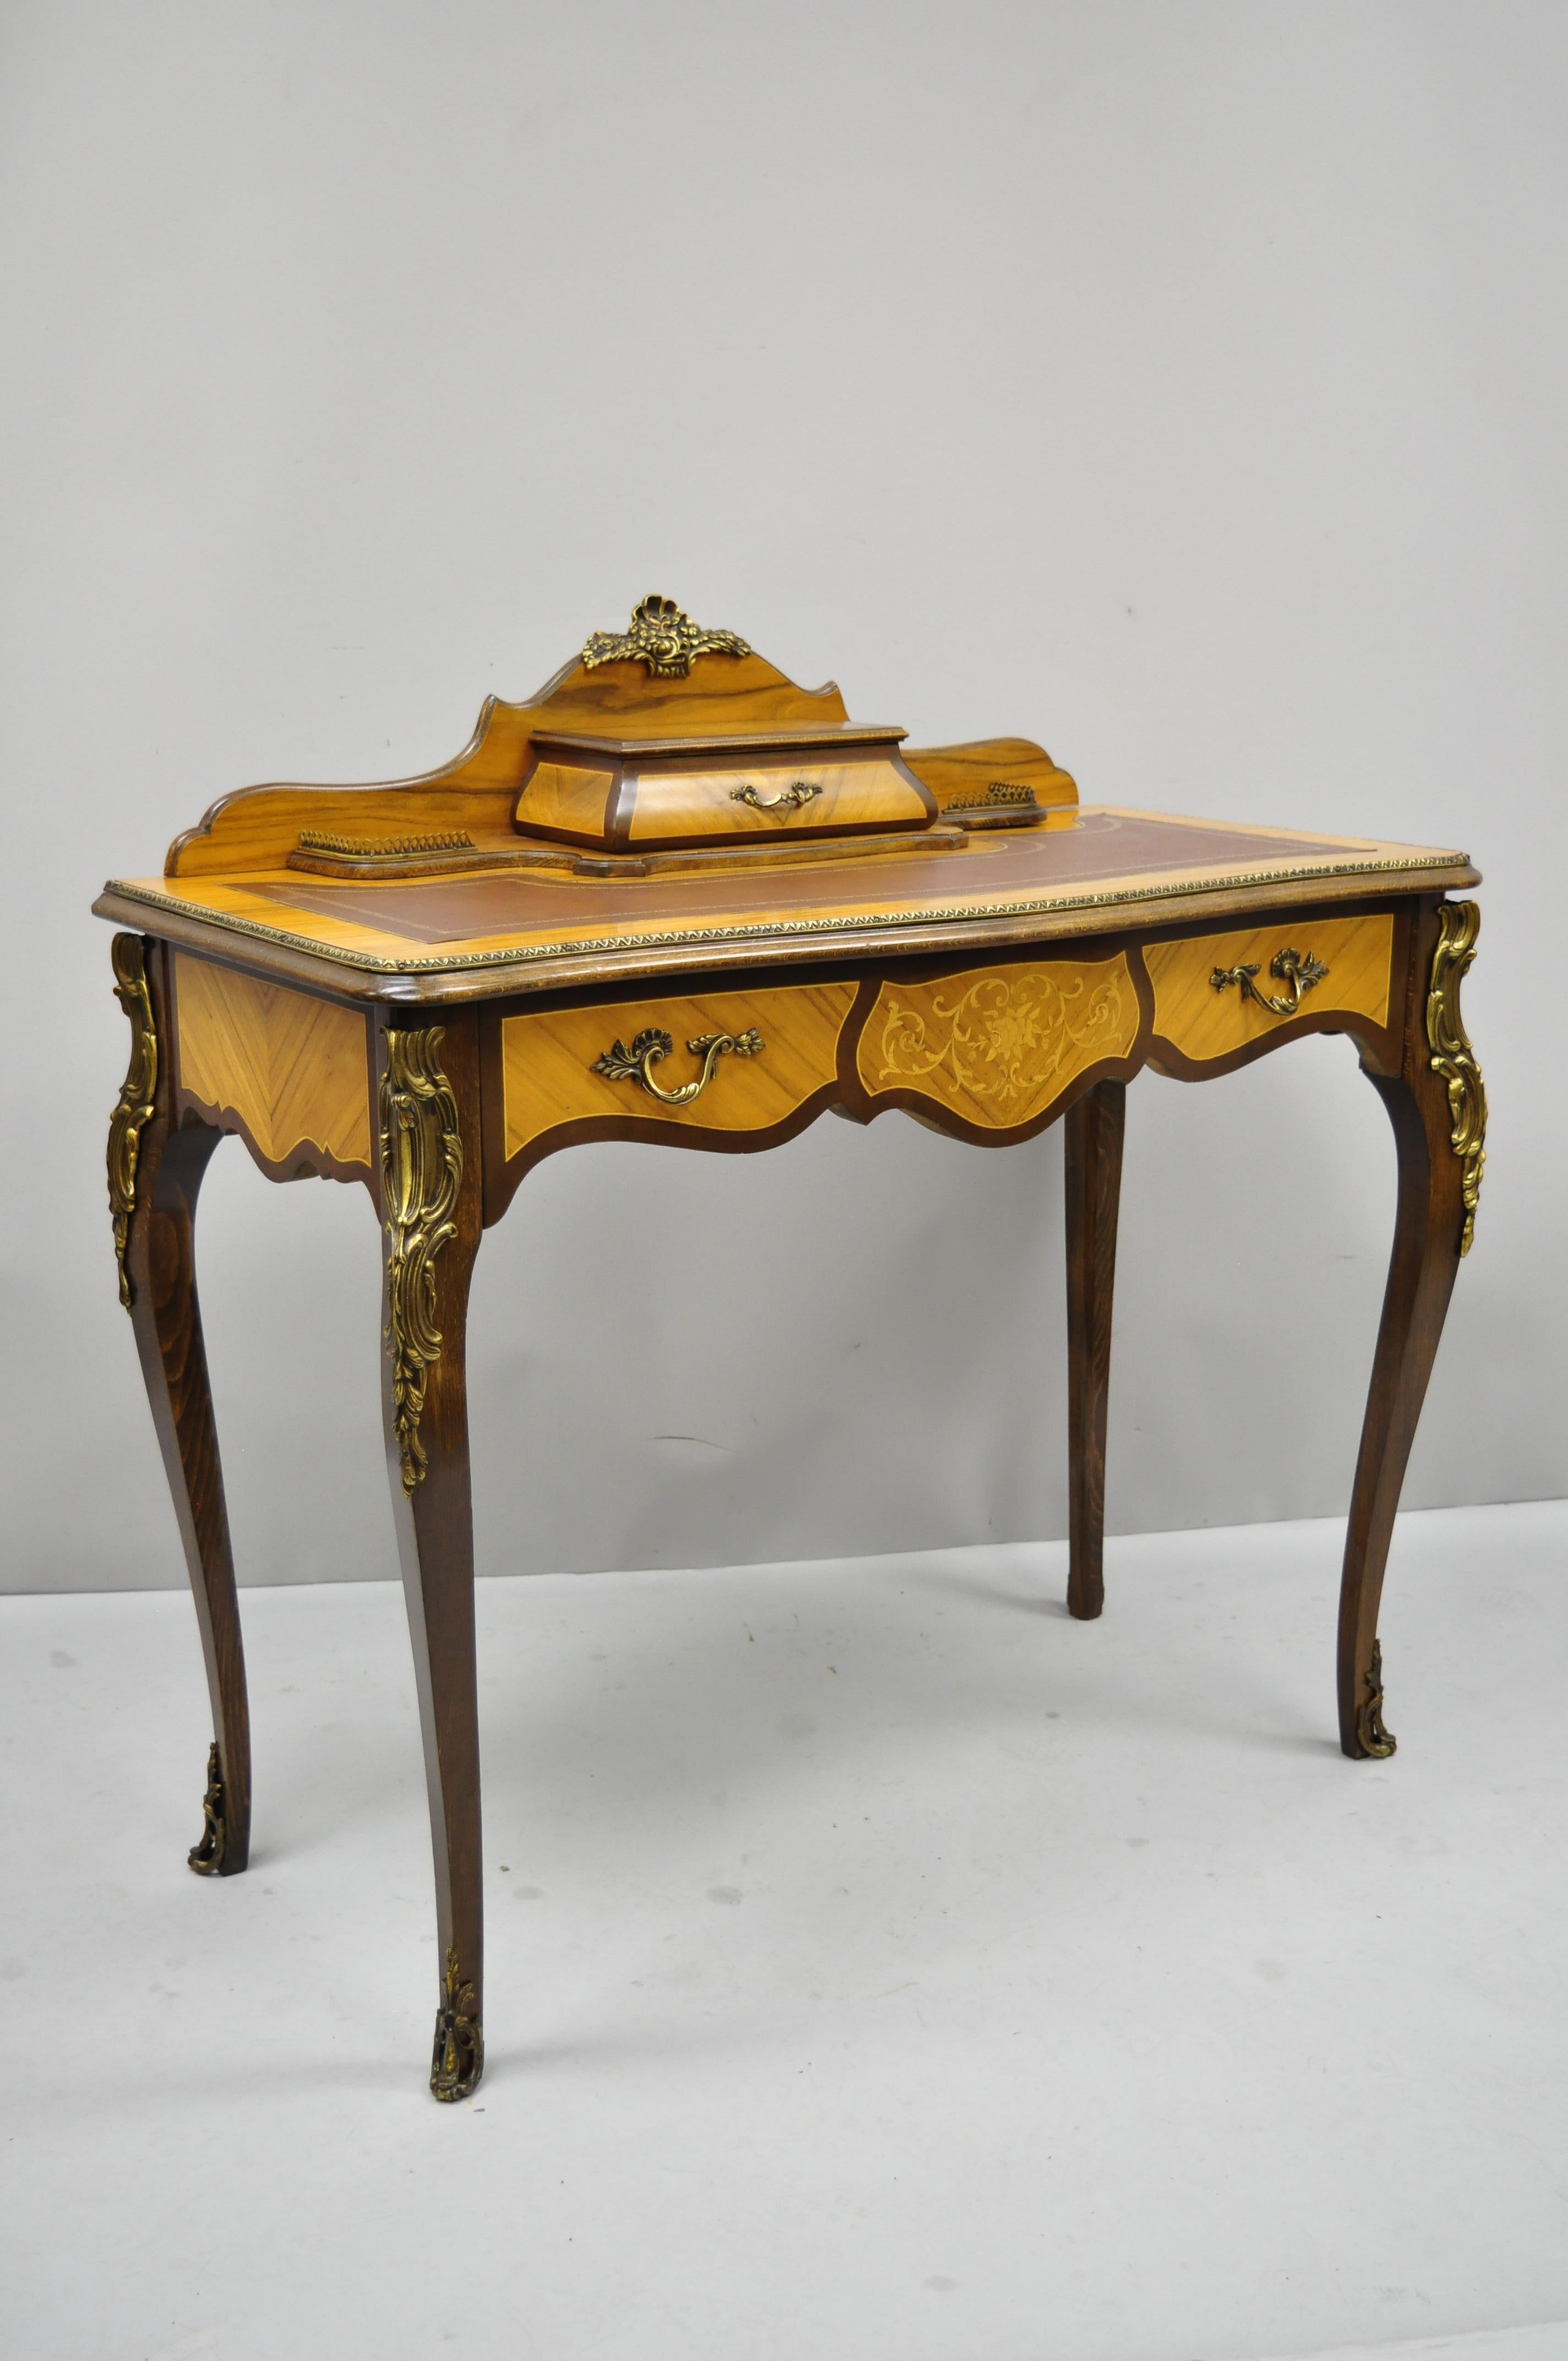 Vintage French Louis XV style inlaid leather top petite ladies writing desk. Item features floral inlay, brass ormolu, beautiful wood grain, 2 dovetailed drawers, cabriole legs, very nice vintage item, great style and form, circa mid-20th century.